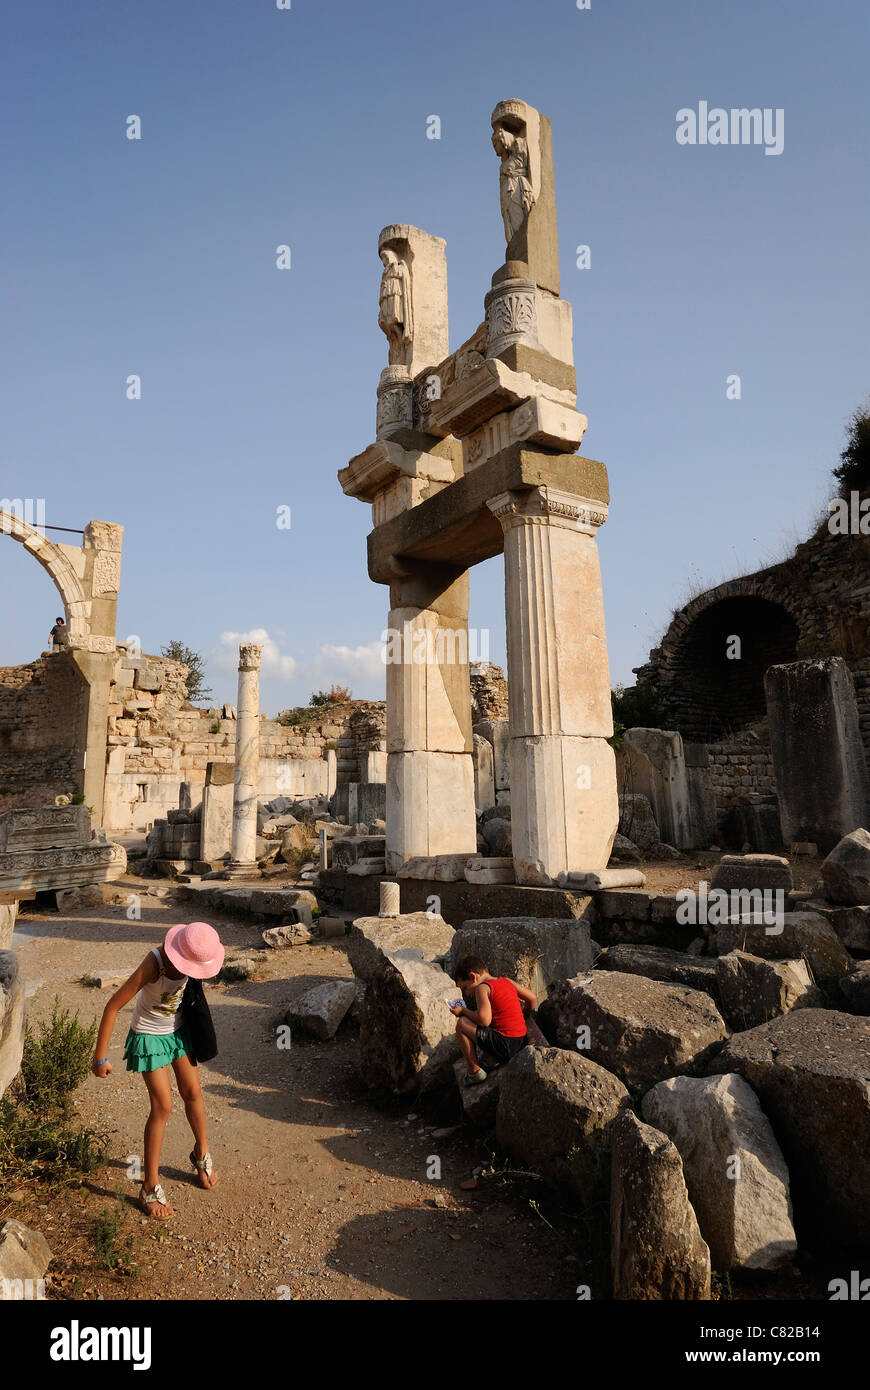 Ephesus, Domitian Square, remaining columns and marble carvings of the Fountain and Temple of Domitian, Ephesus, Turkey Stock Photo